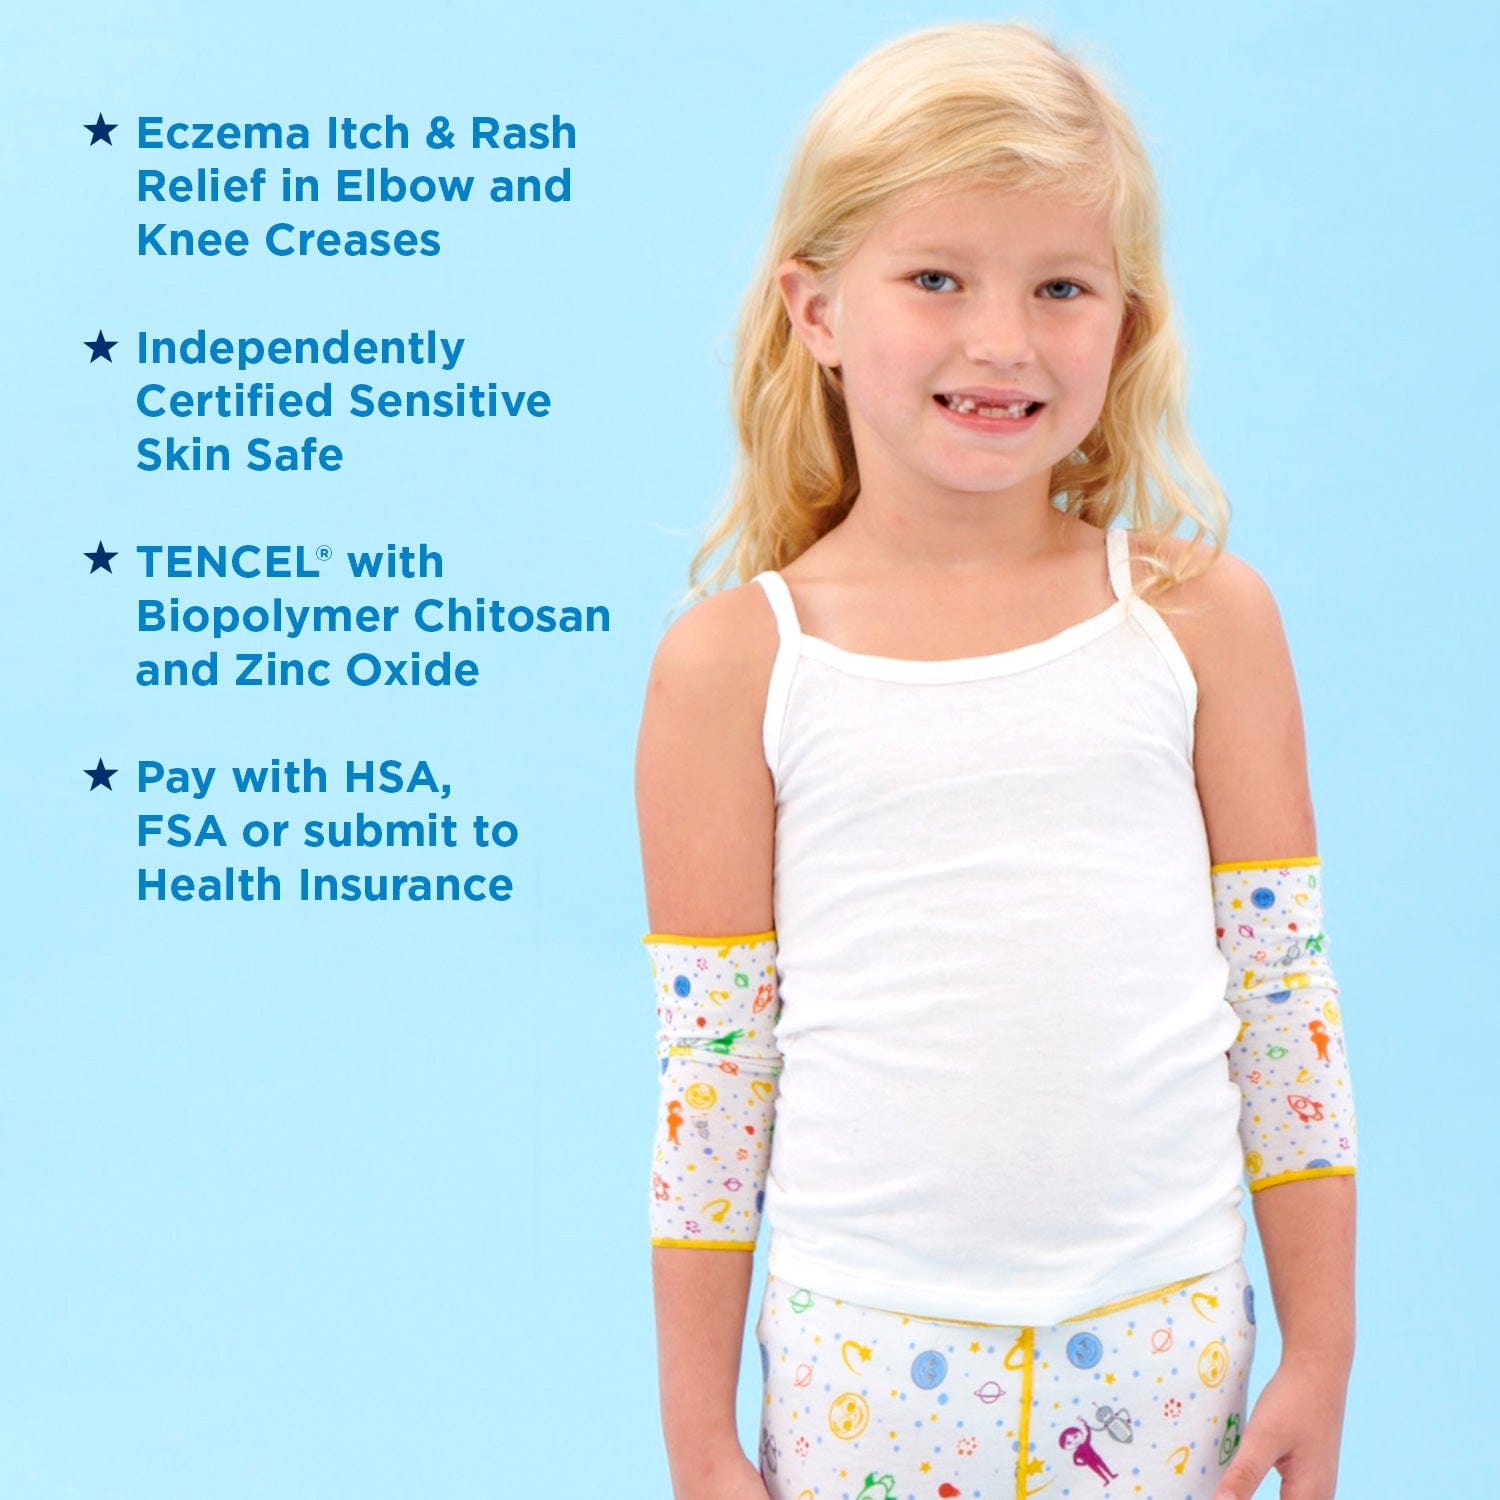 “Eczema Baby Sleeves with anti scratch TENCEL and zinc oxide to Control arm and leg, knee, ankle and foot itching at Night”